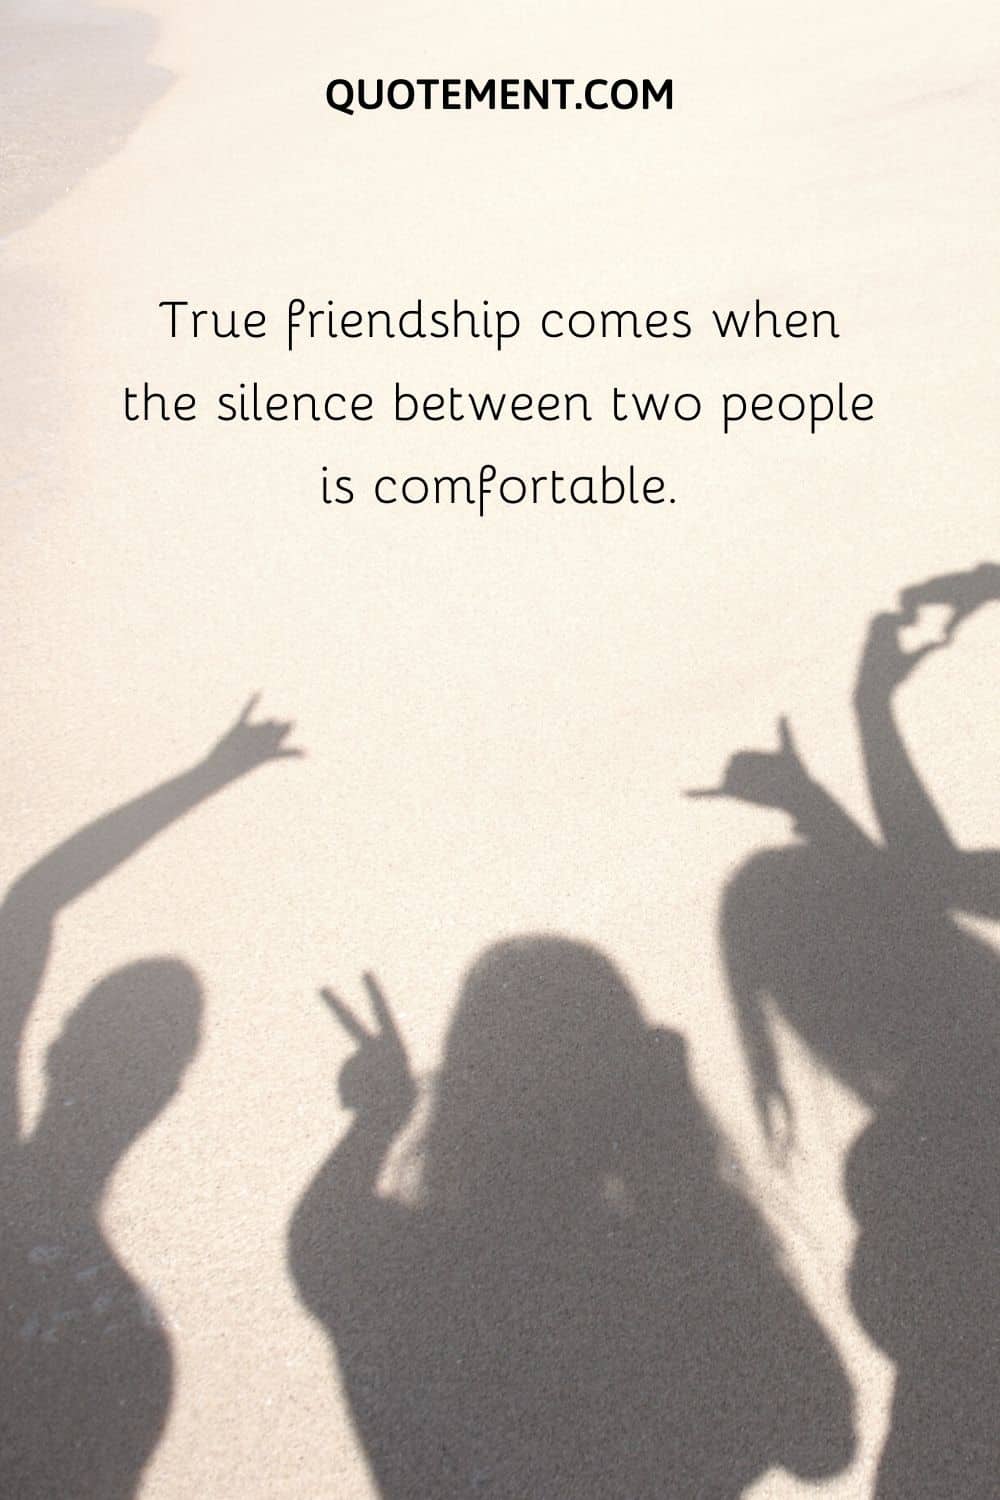 True friendship comes when the silence between two people is comfortable